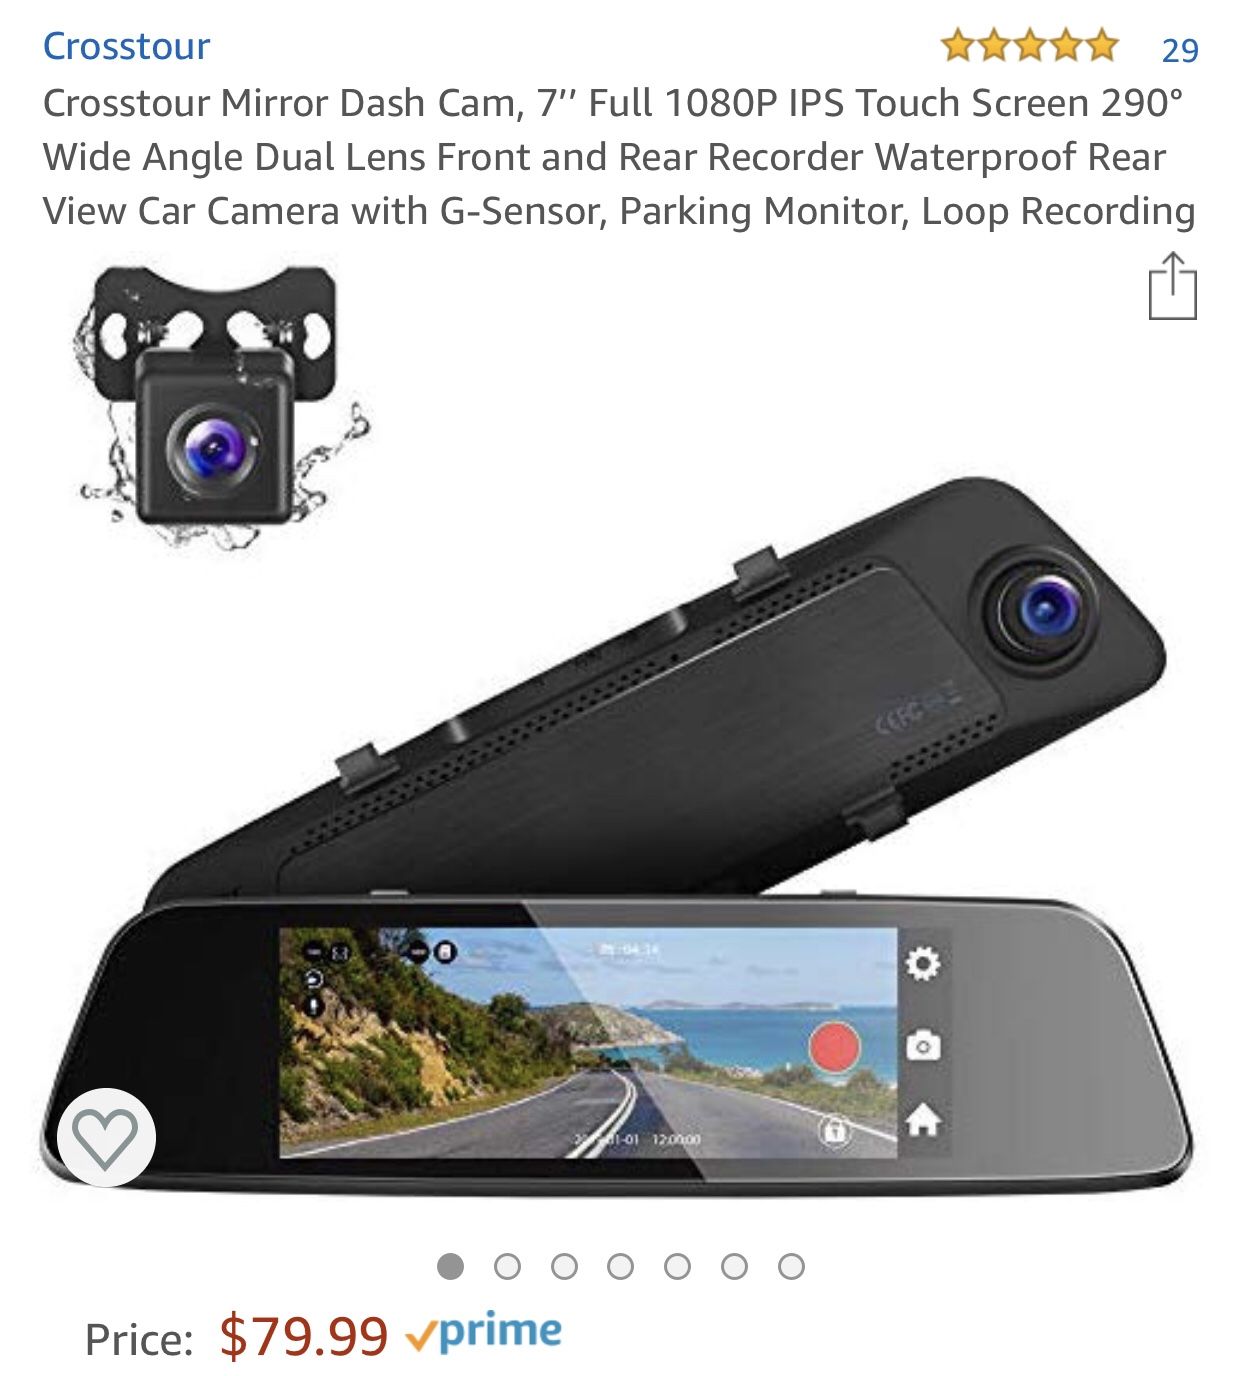 Mirror Dash Cam, 7’’ Full 1080P IPS Touch Screen 290° Wide Angle Dual Lens Front and Rear Recorder Waterproof Rear View Car Camera with G-Sensor, Par